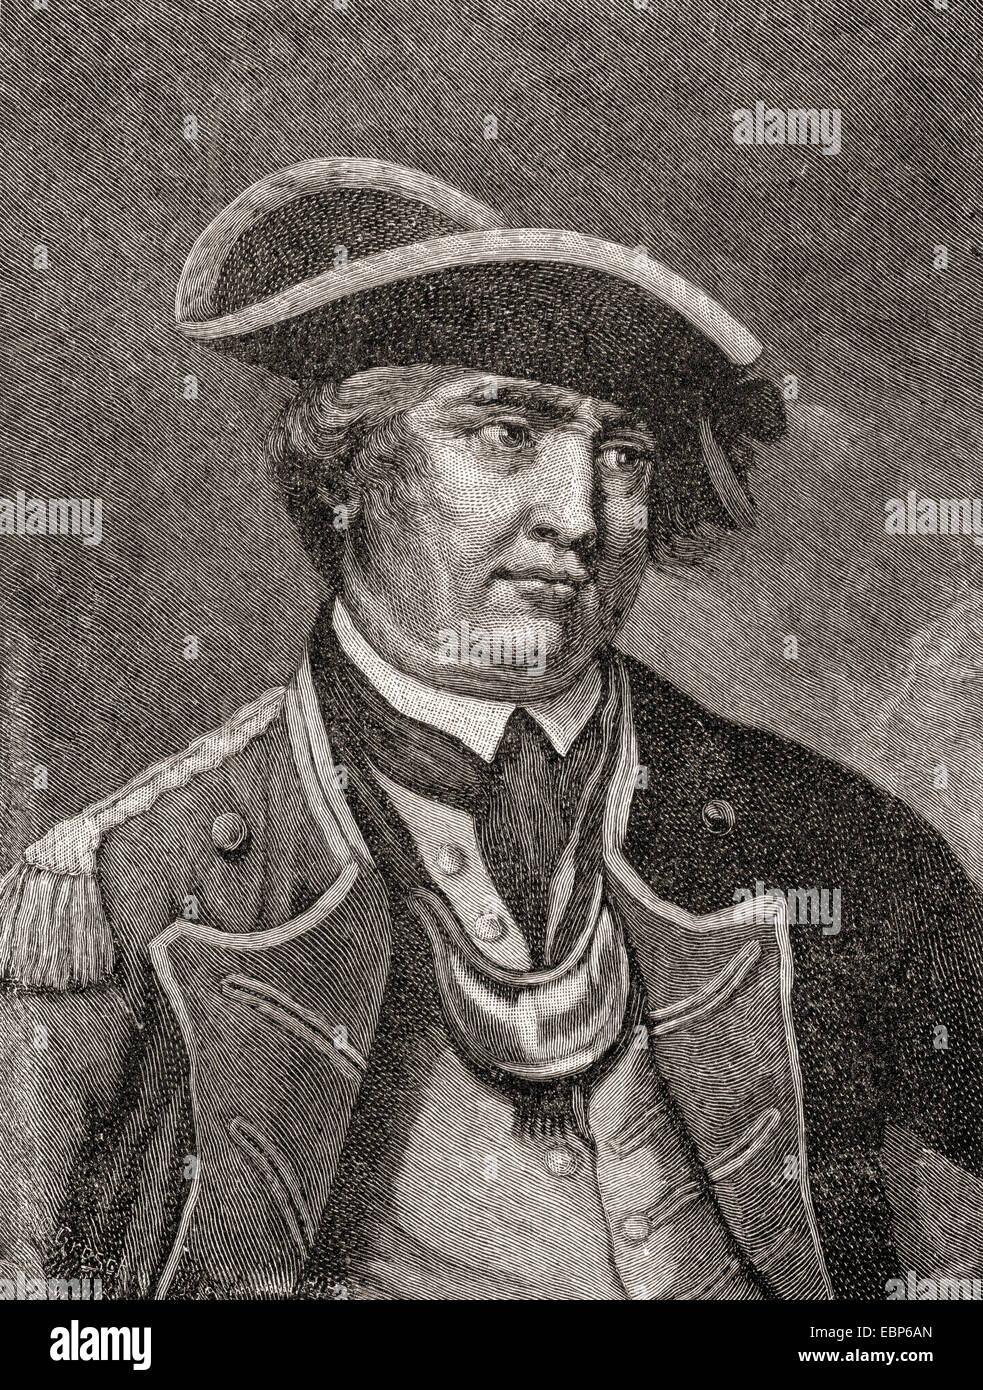 Israel Putnam, 1718 –1790.  American army general officer and Freemason, popularly known as 'Old Put', who fought with distinction at the Battle of Bunker Hill (1775) during the American Revolutionary War. Stock Photo